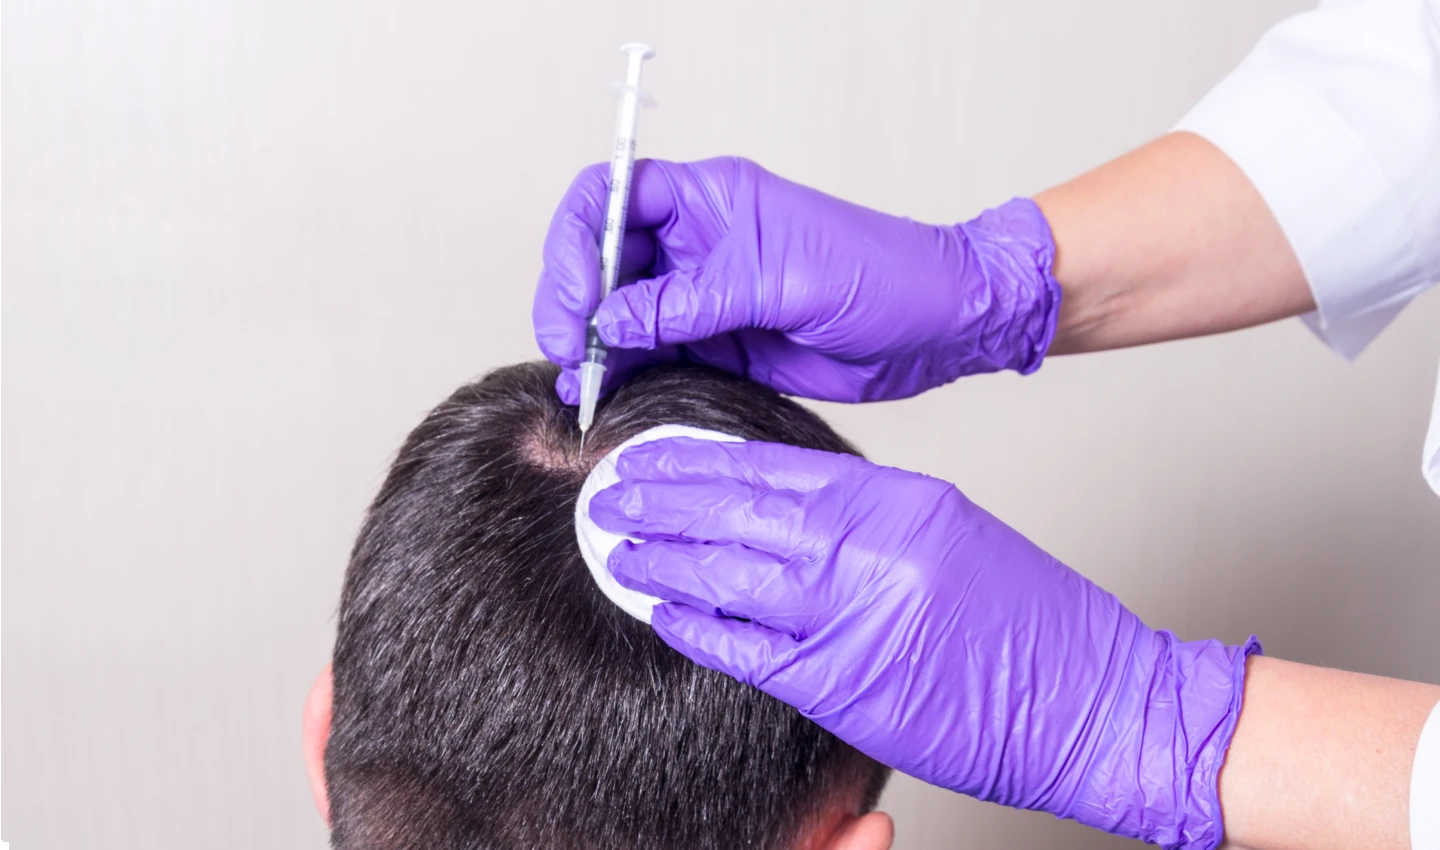 A doctor performing platelet-rich plasma therapy on a patient's scalp to stimulate hair growth and improve the overall appearance of the hair for hair transplant revision purposes.